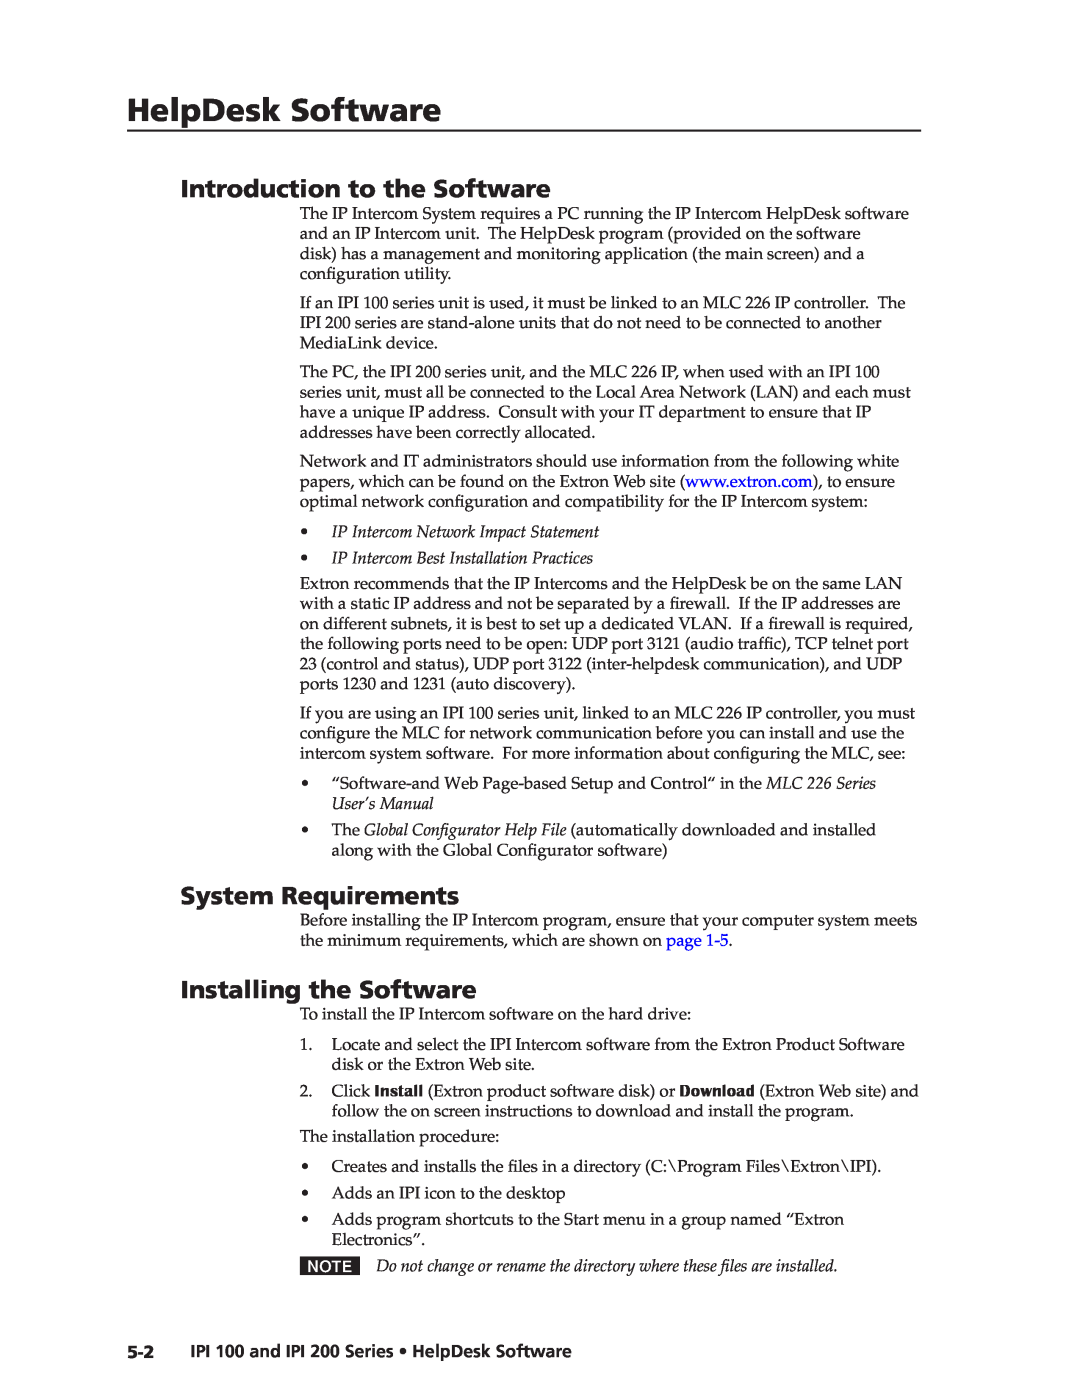 Extron electronic IPI 100 HelpDesk Software, Introduction to the Software, Installling the Software, System Requirements 